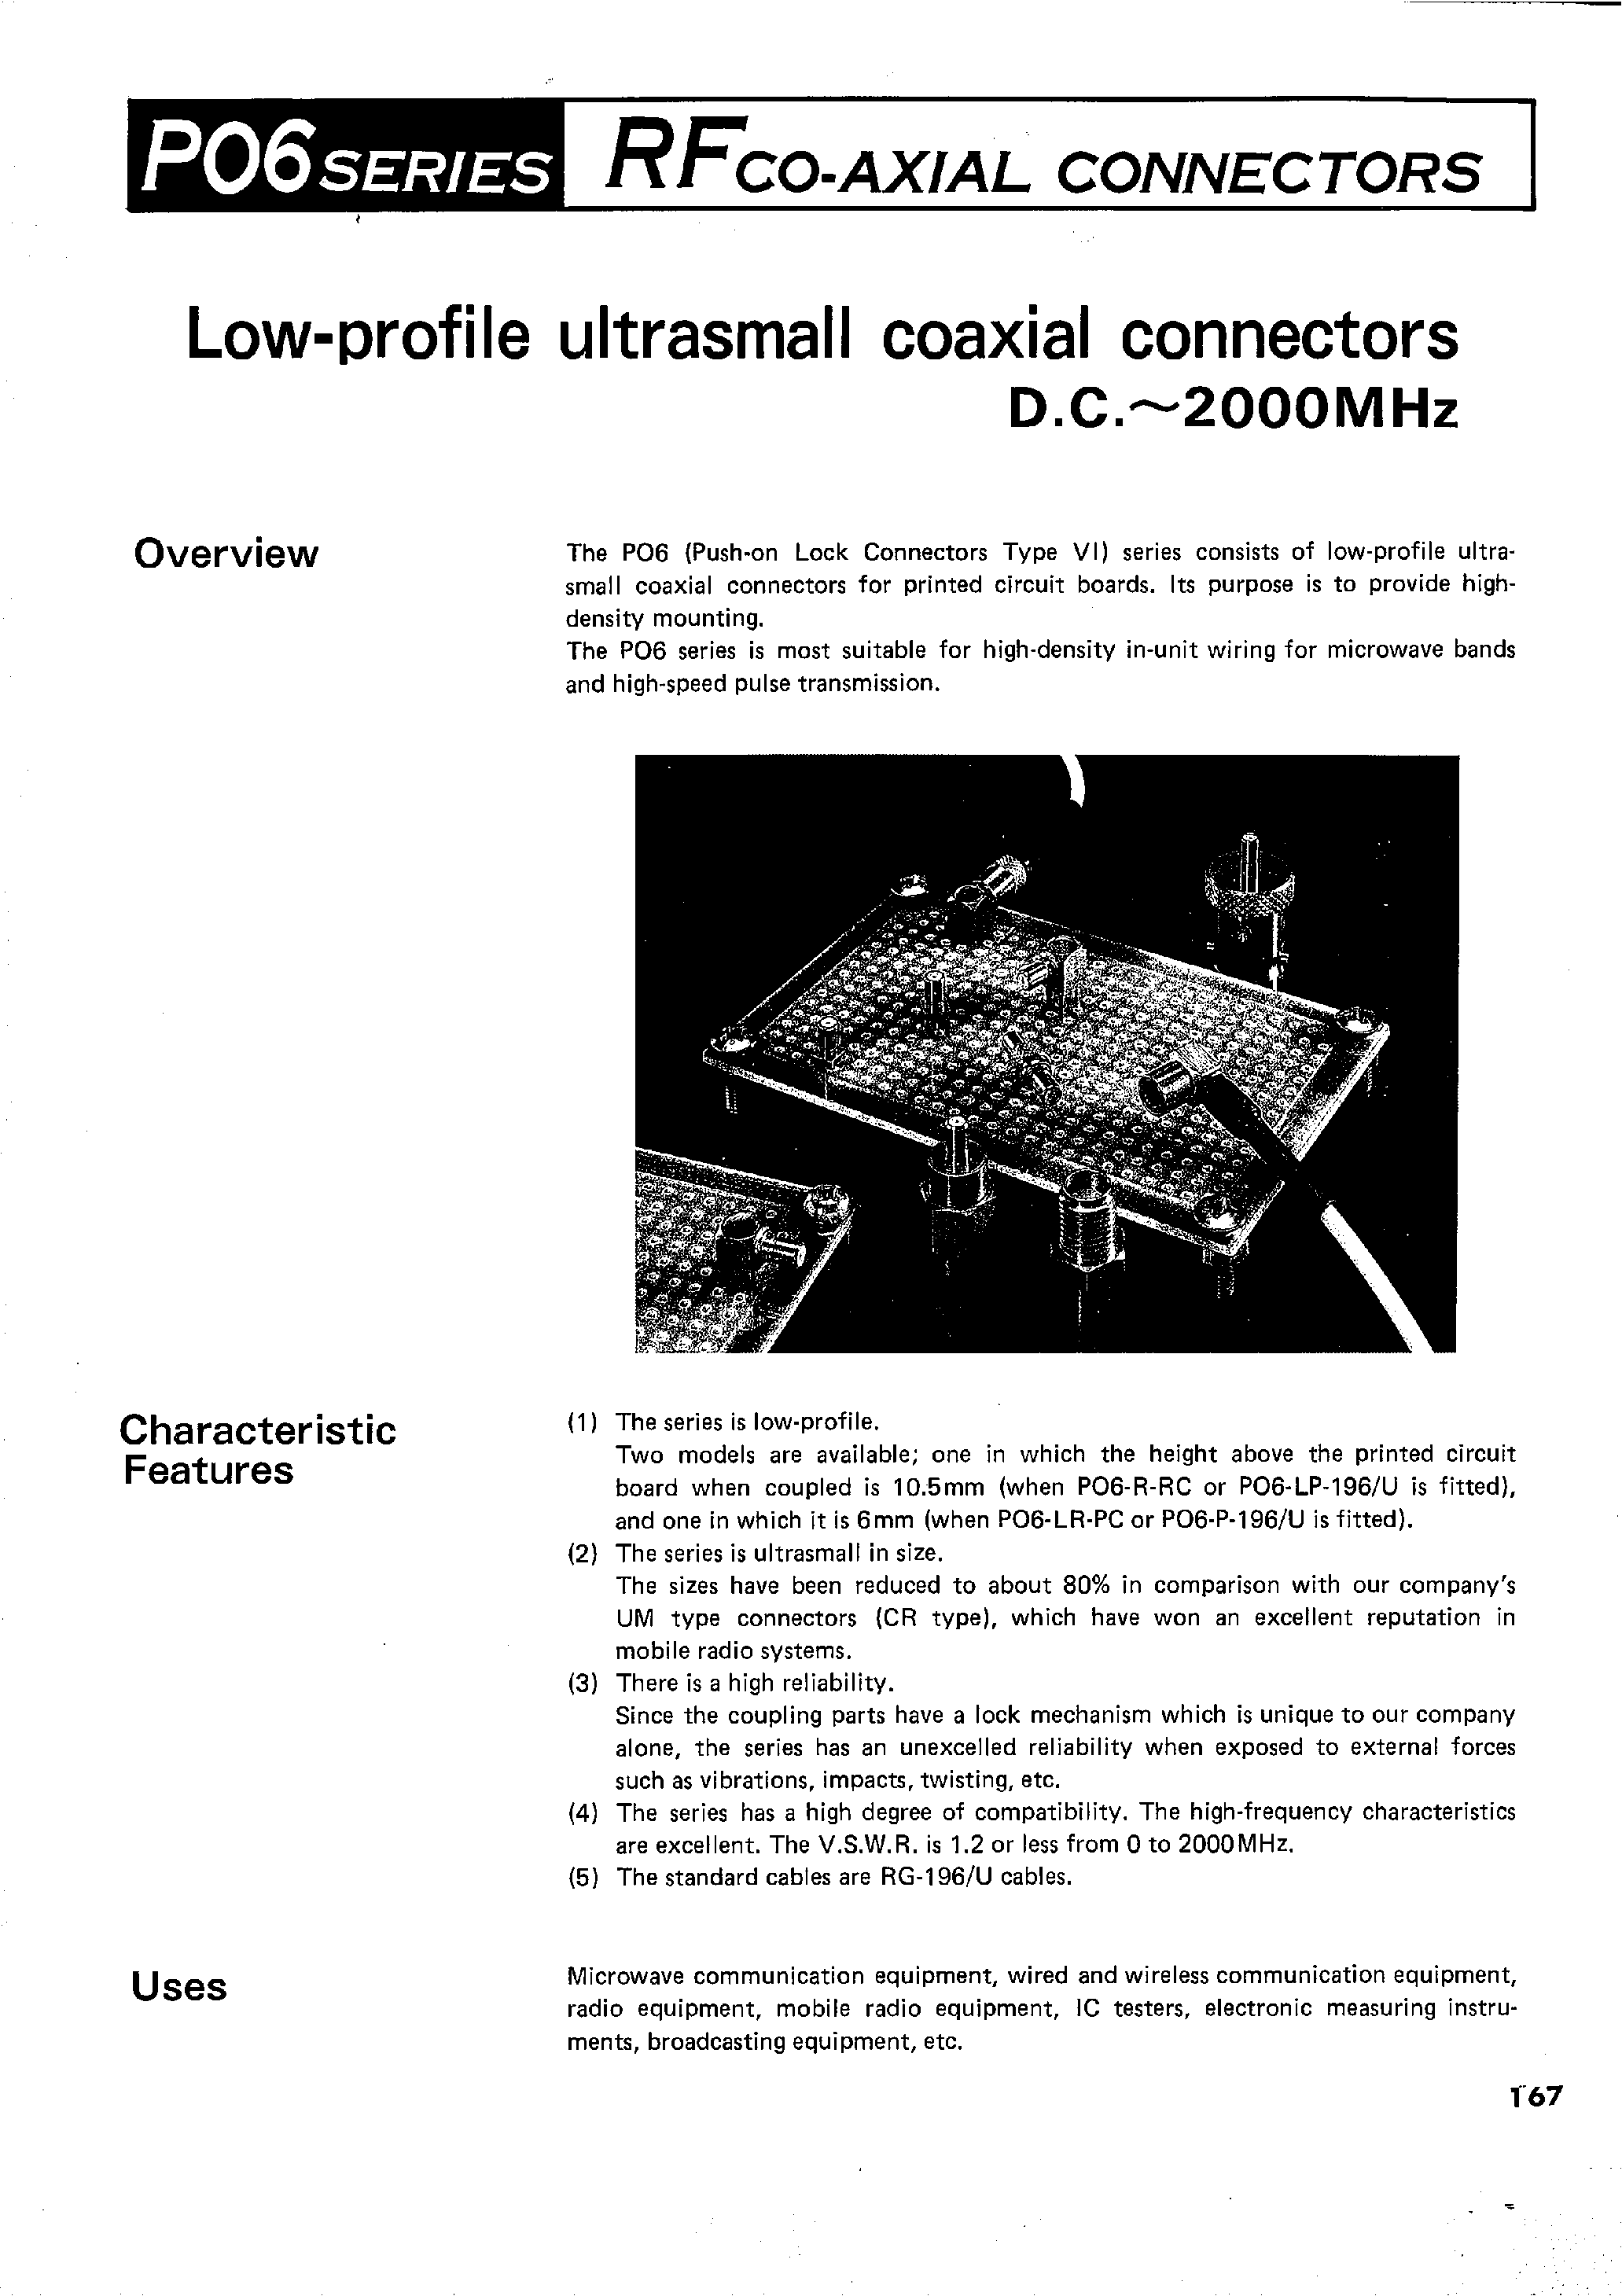 Datasheet PO6-LR-PC - RFCO-AXIAL CONNECTORS(Low-profile ultrasmall coaxial connector) page 1